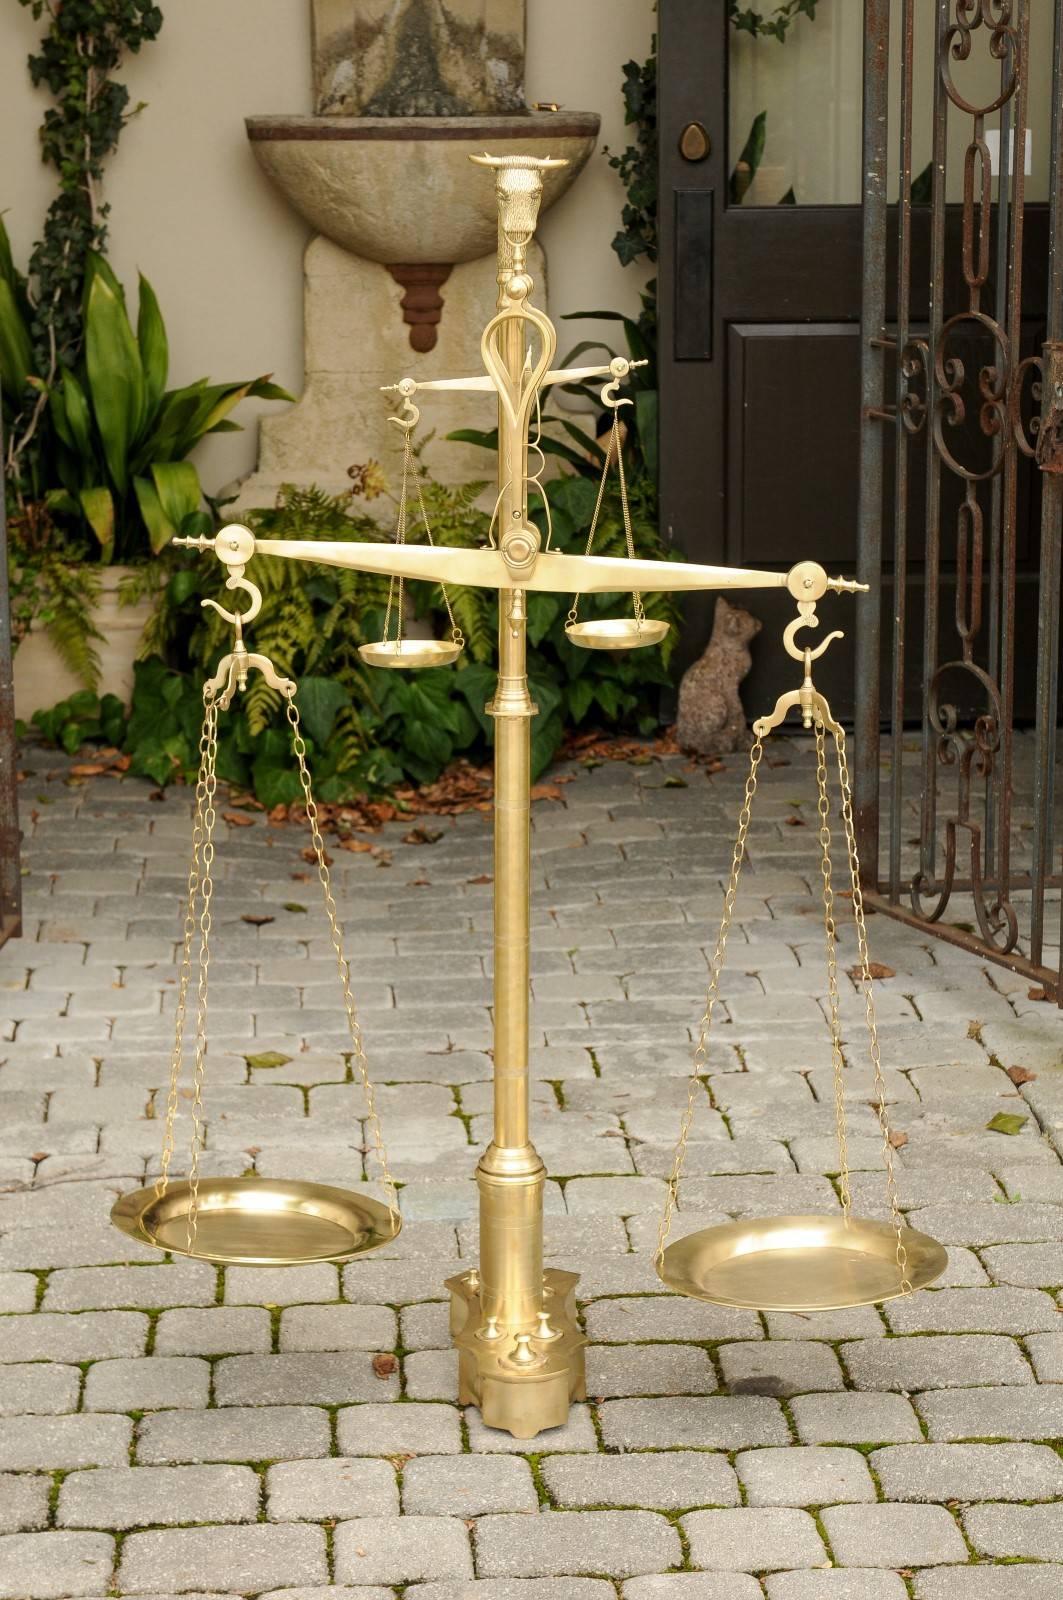 A Dutch two-tiered brass balance scale with its weights from the late 19th century. This large size brass scale was born in the Netherlands in the 1880s. Featuring a central beam supporting the various plates, the eye becomes immediately aware of